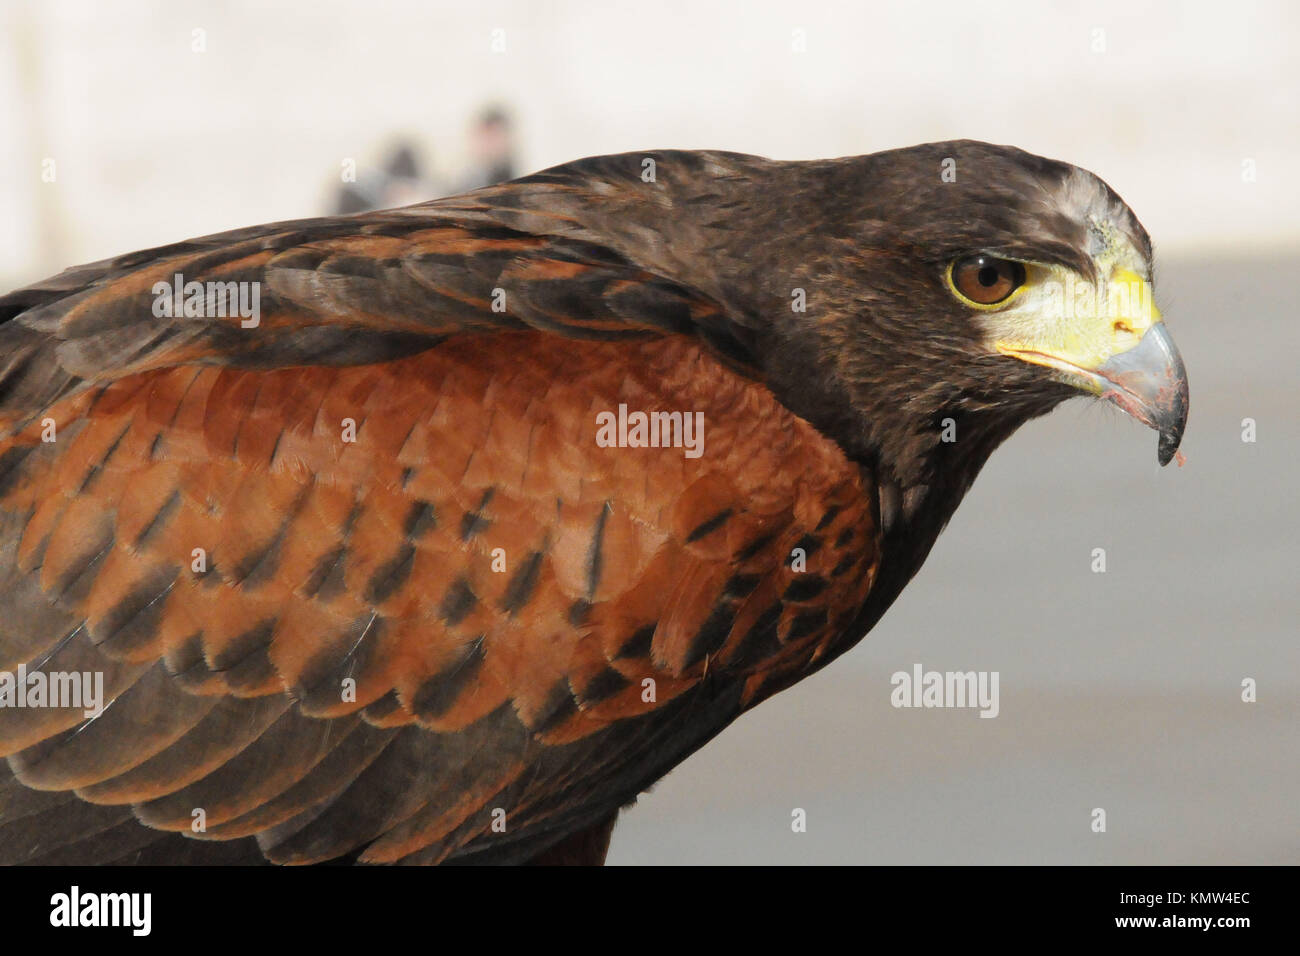 A harris hawk in Trafalgar Square on April 7, 2011 in London, England. Photo by Barry King/Alamy Stock Photo Stock Photo